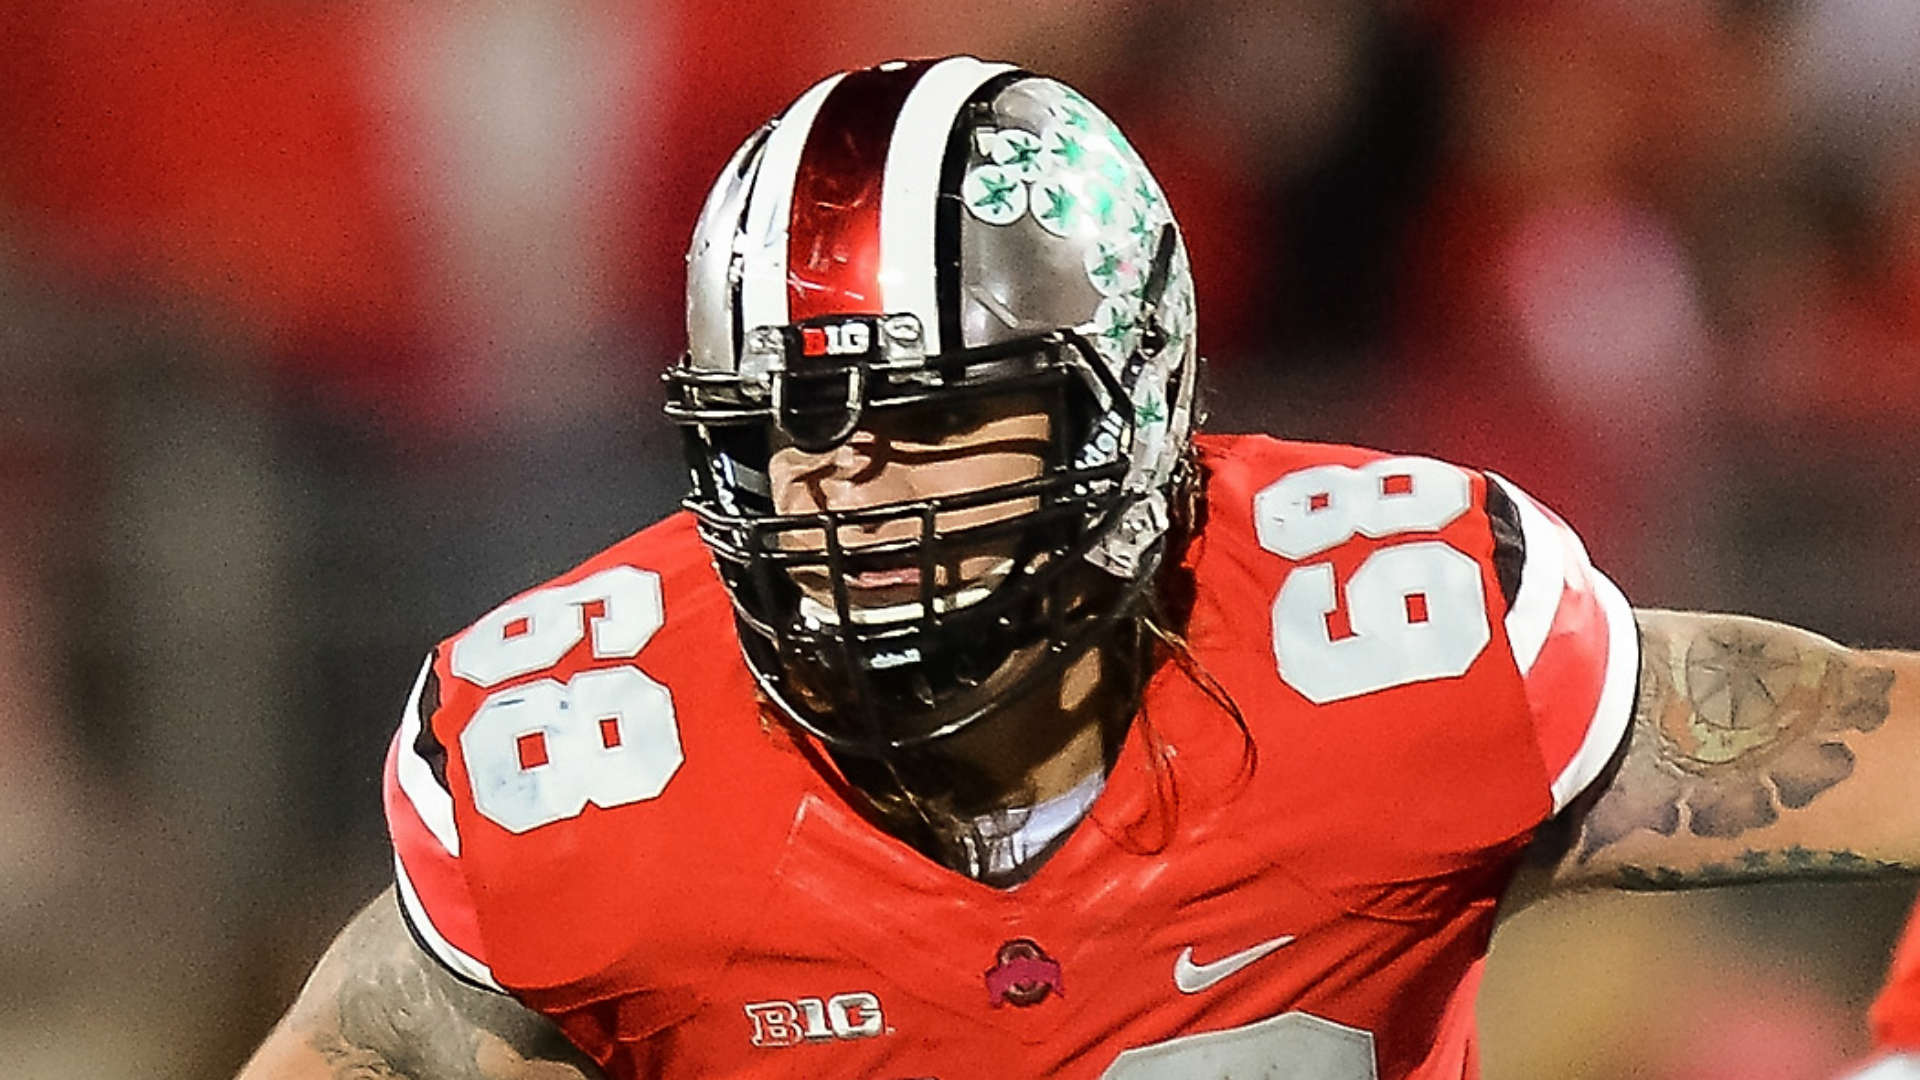 Ohio State alum Taylor Decker upset after Sean McDonough says he went to Michigan